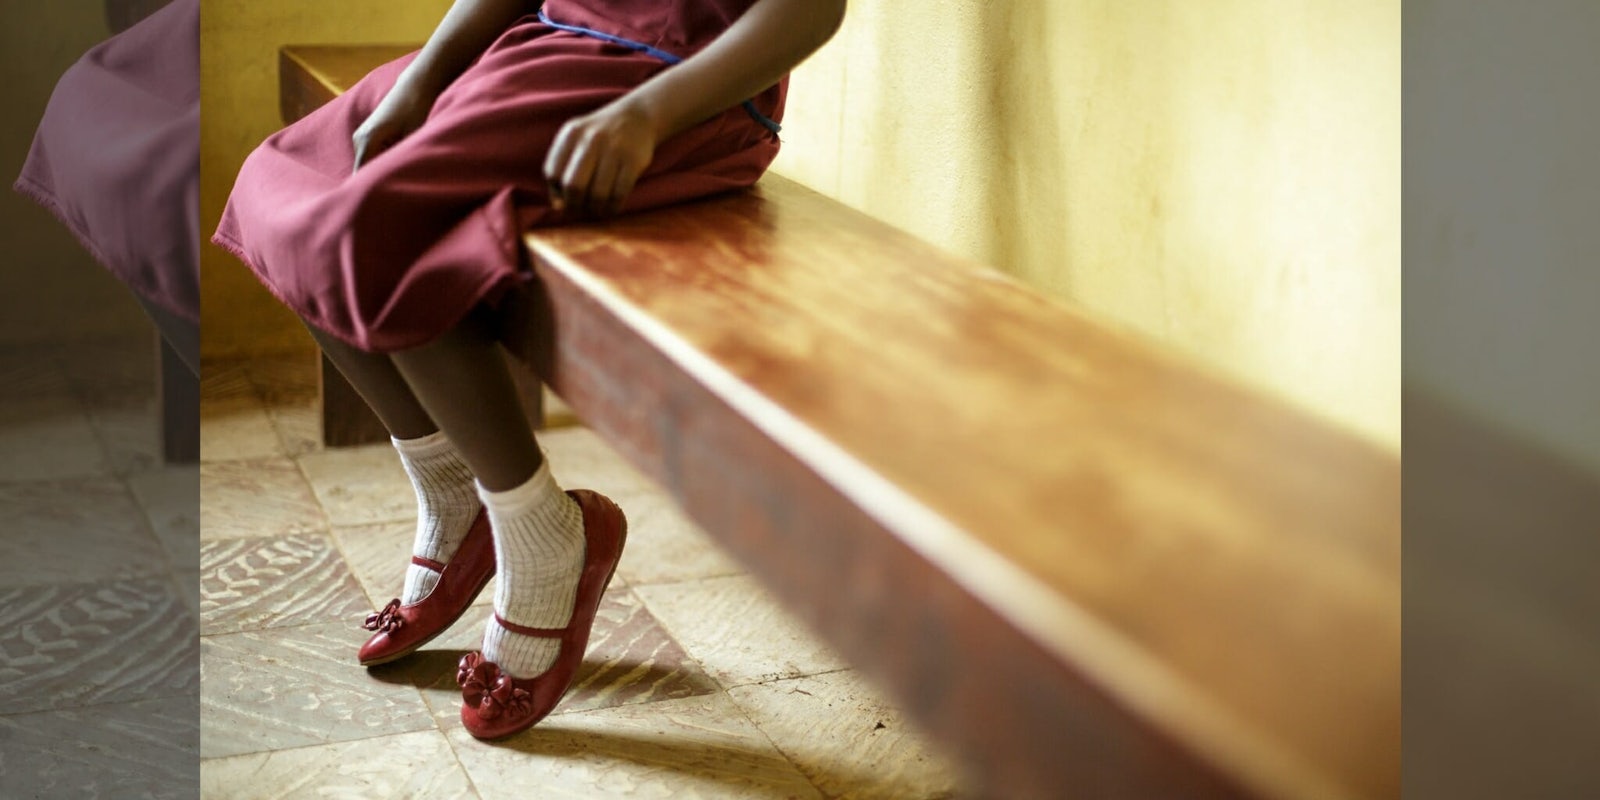 A UNICEF image showing a girl sitting on a bench symbolizing the International Day of Zero Tolerance of Female Genital Mutilation.